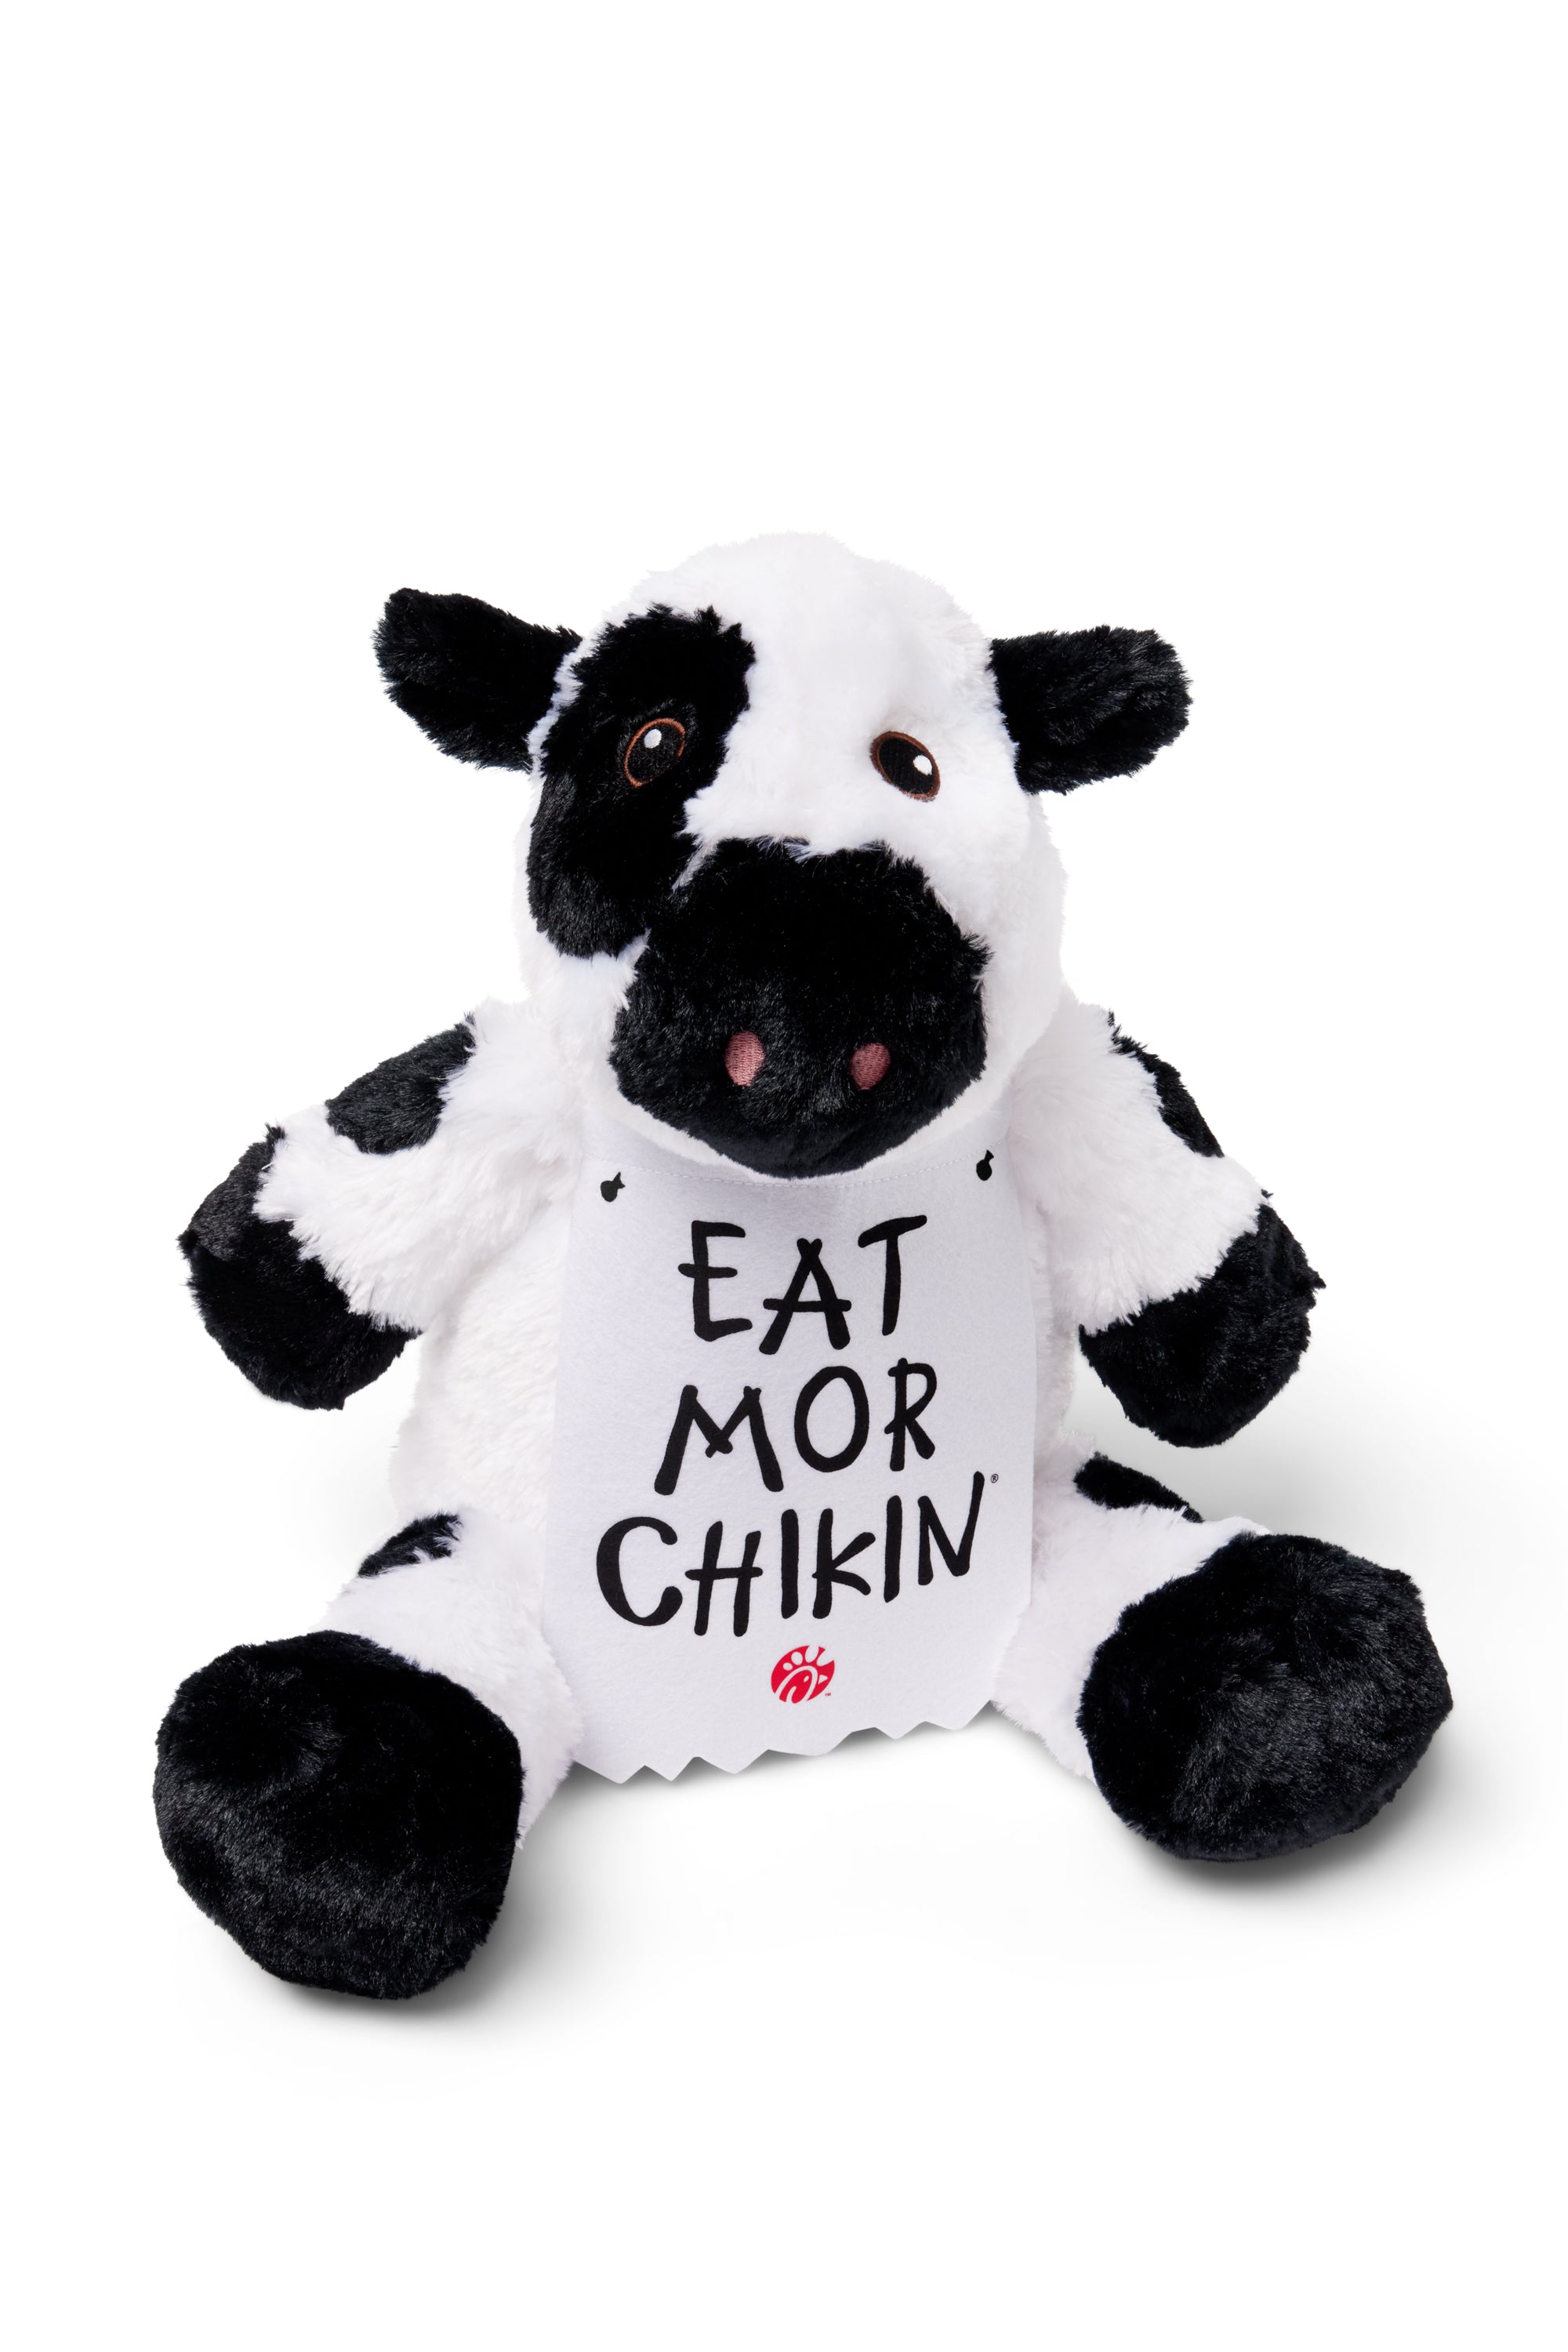 Sitting Cuddly Plush Cow wearing sign that says &quot;EAT MOR CHIKIN&quot;